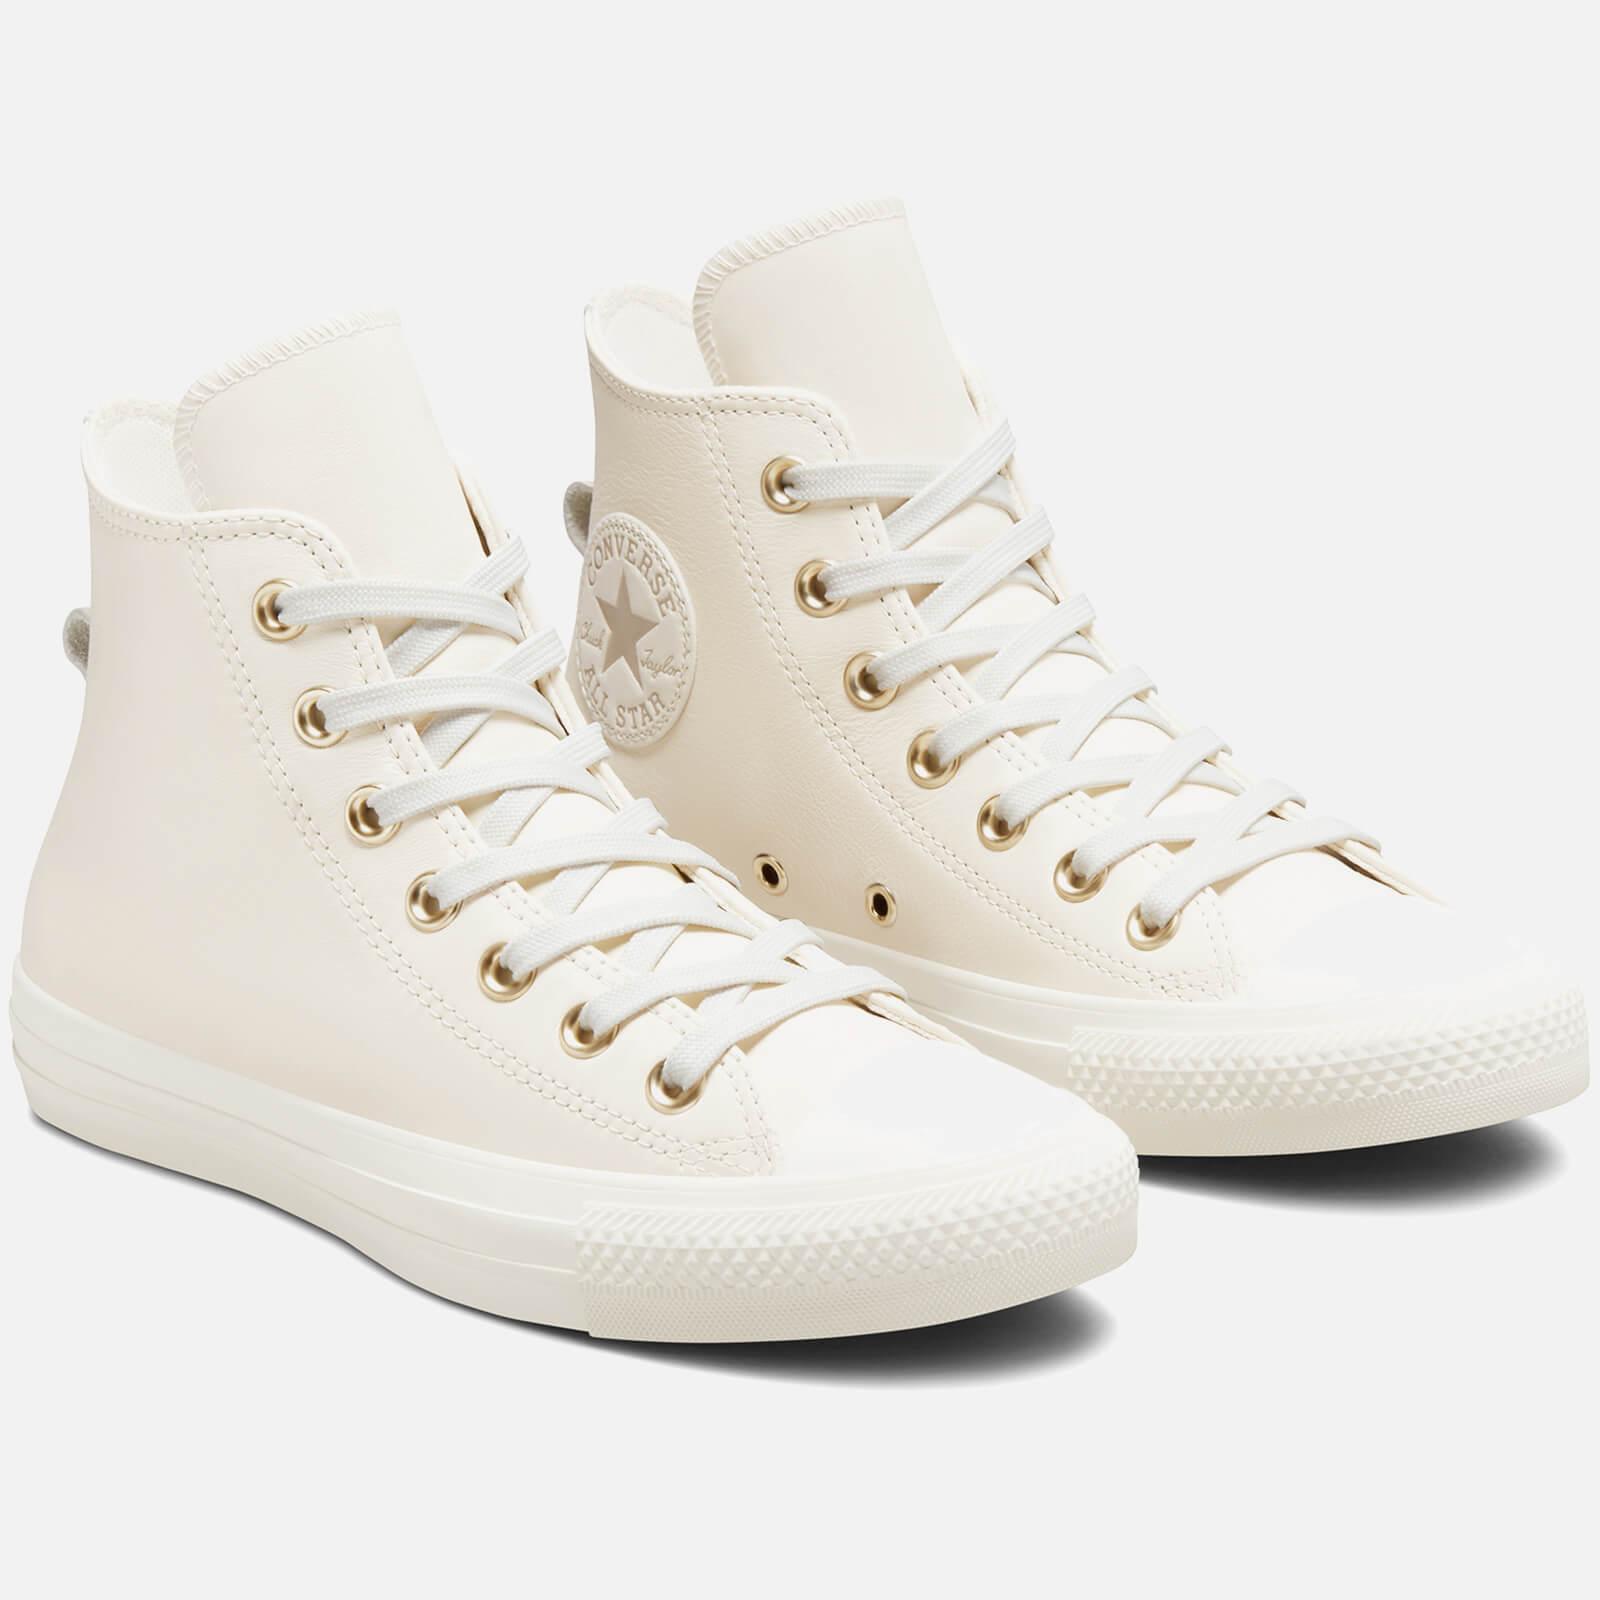 Converse Chuck Taylor All Star Earthy Tones Hi-top Trainers in White | Lyst